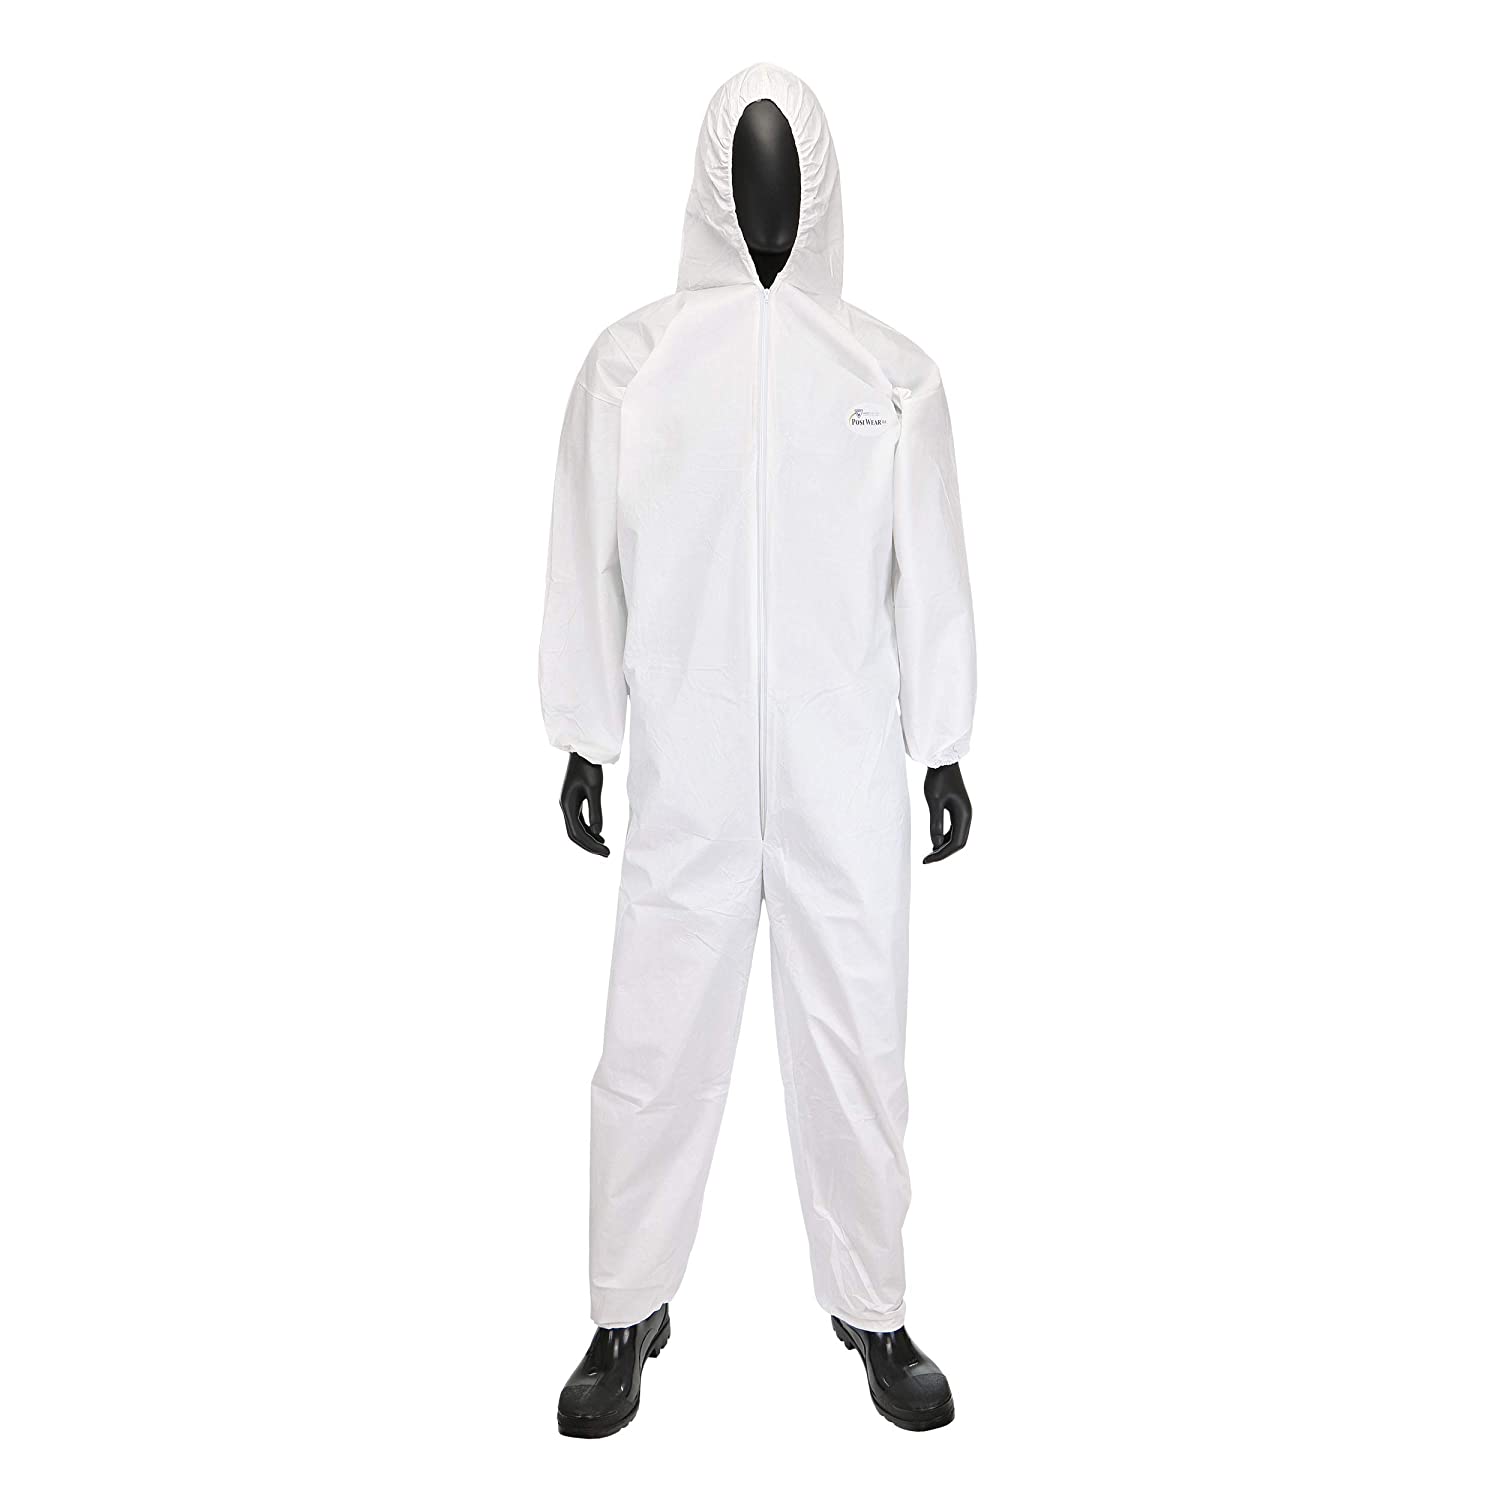 West Chester 3606 Polypropylene PosiWear BA: Breathable Advantage Microporous Coverall – [Pack of 25] XX-Large, Safety Overall with Zipper Front, Elastic Wrist, Ankle, Attached Hood